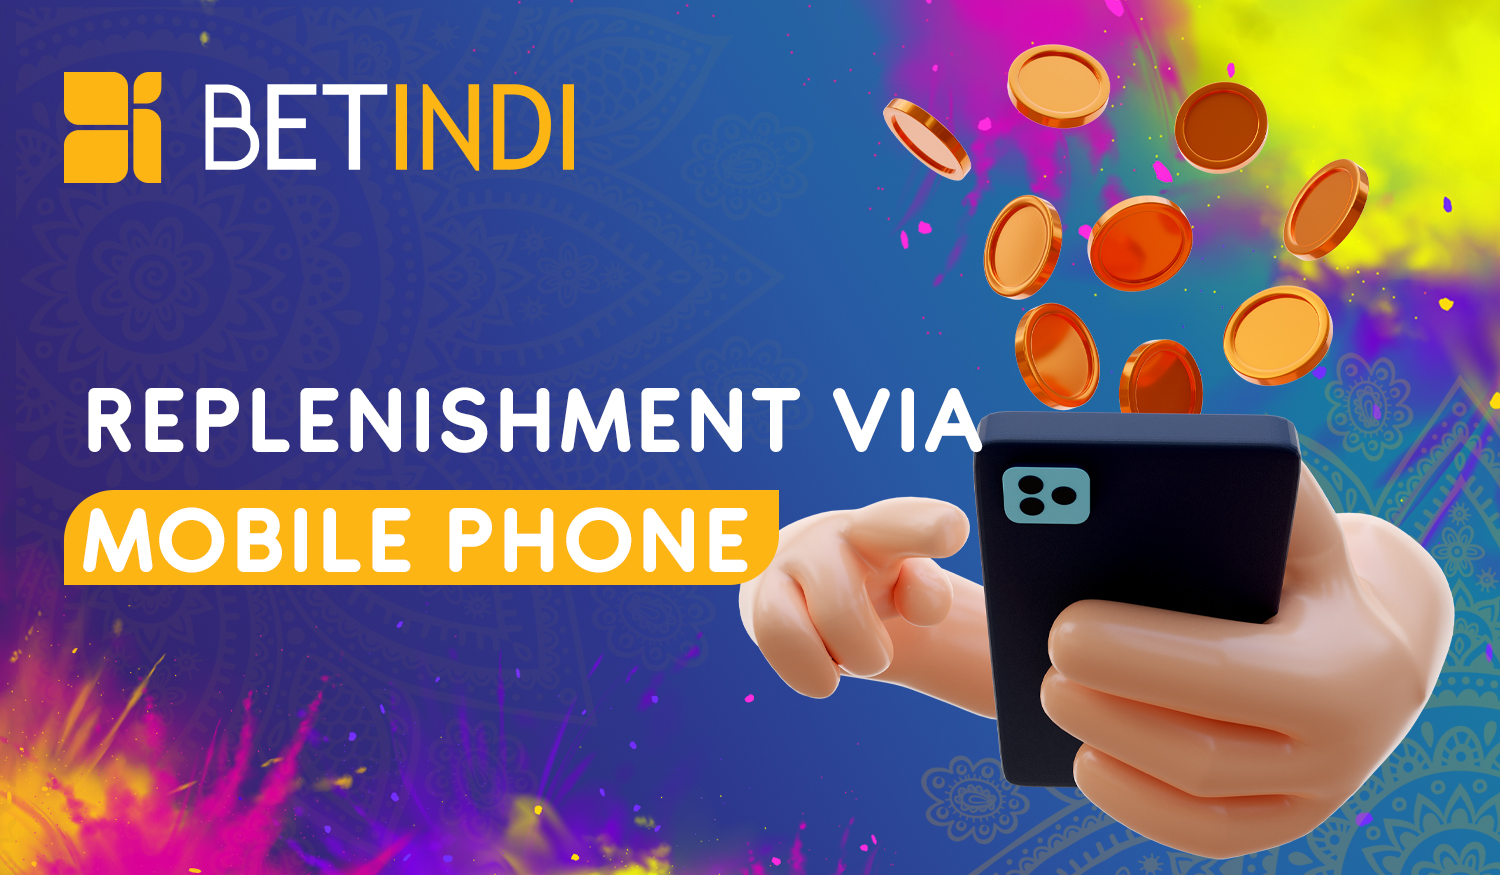 How to make a deposit at Betindi using your cell phone